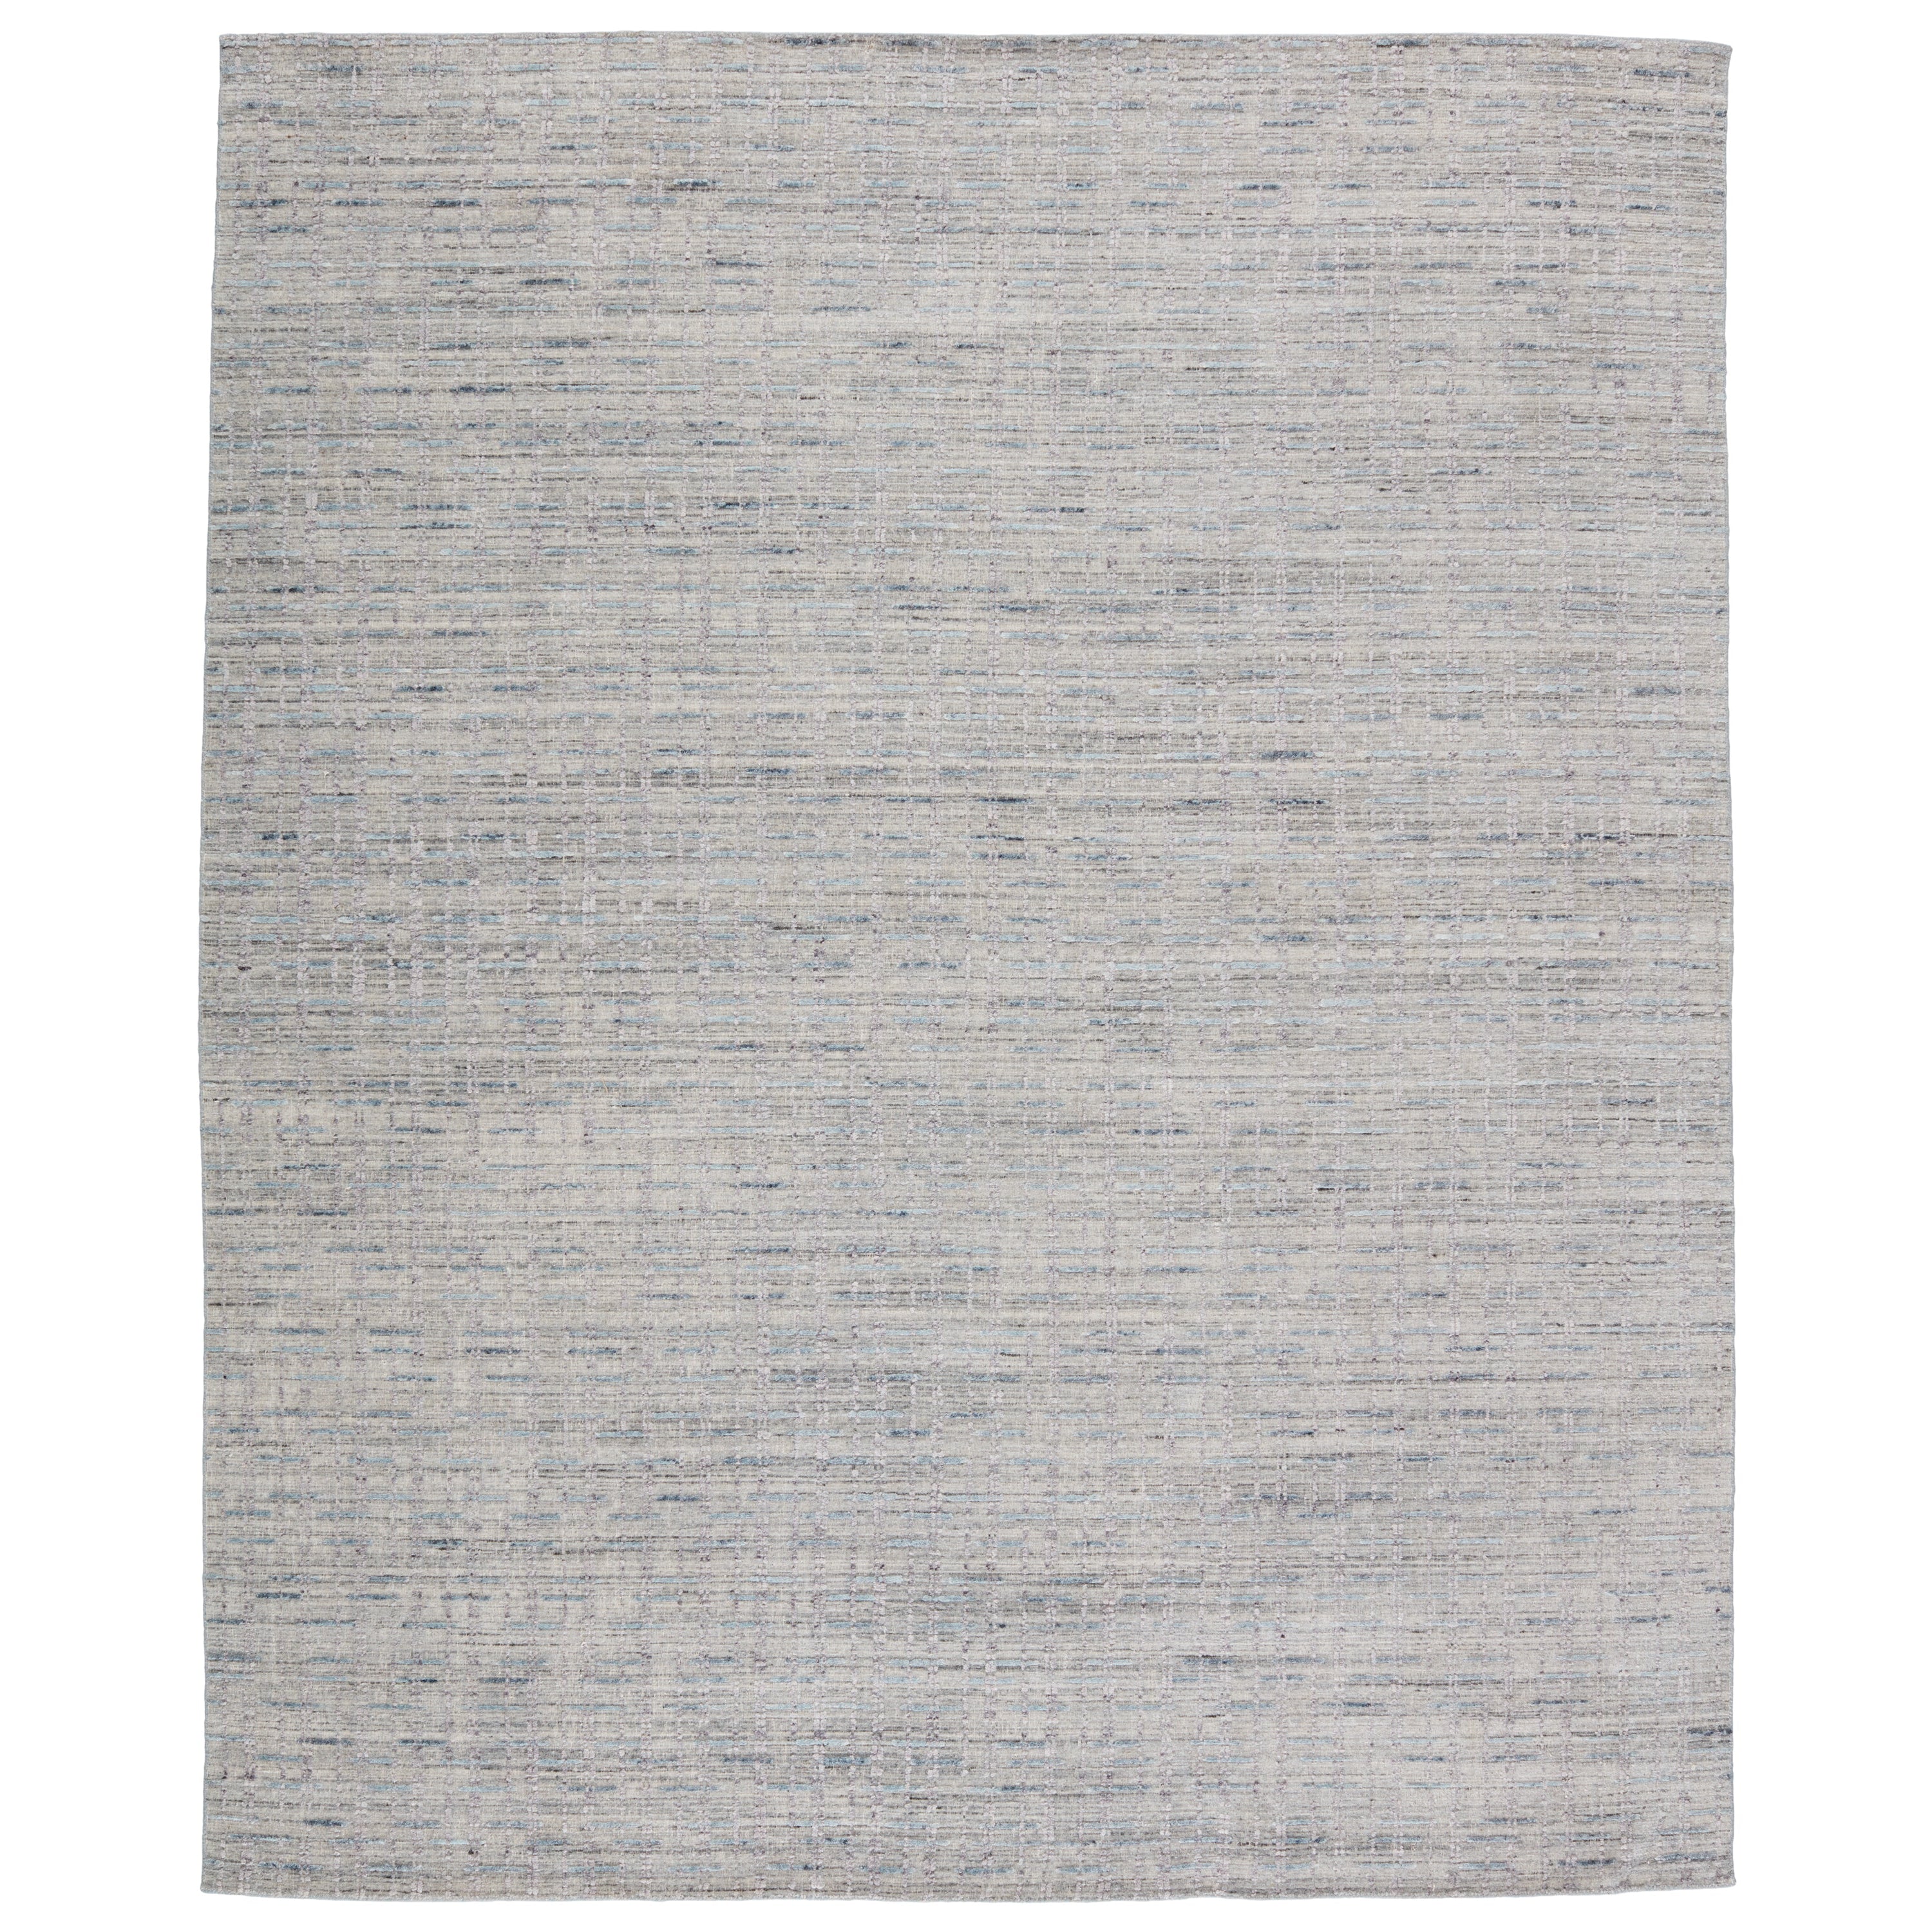 Chaudhary Living Gray Reversible Felt Pad for a 7' x 10